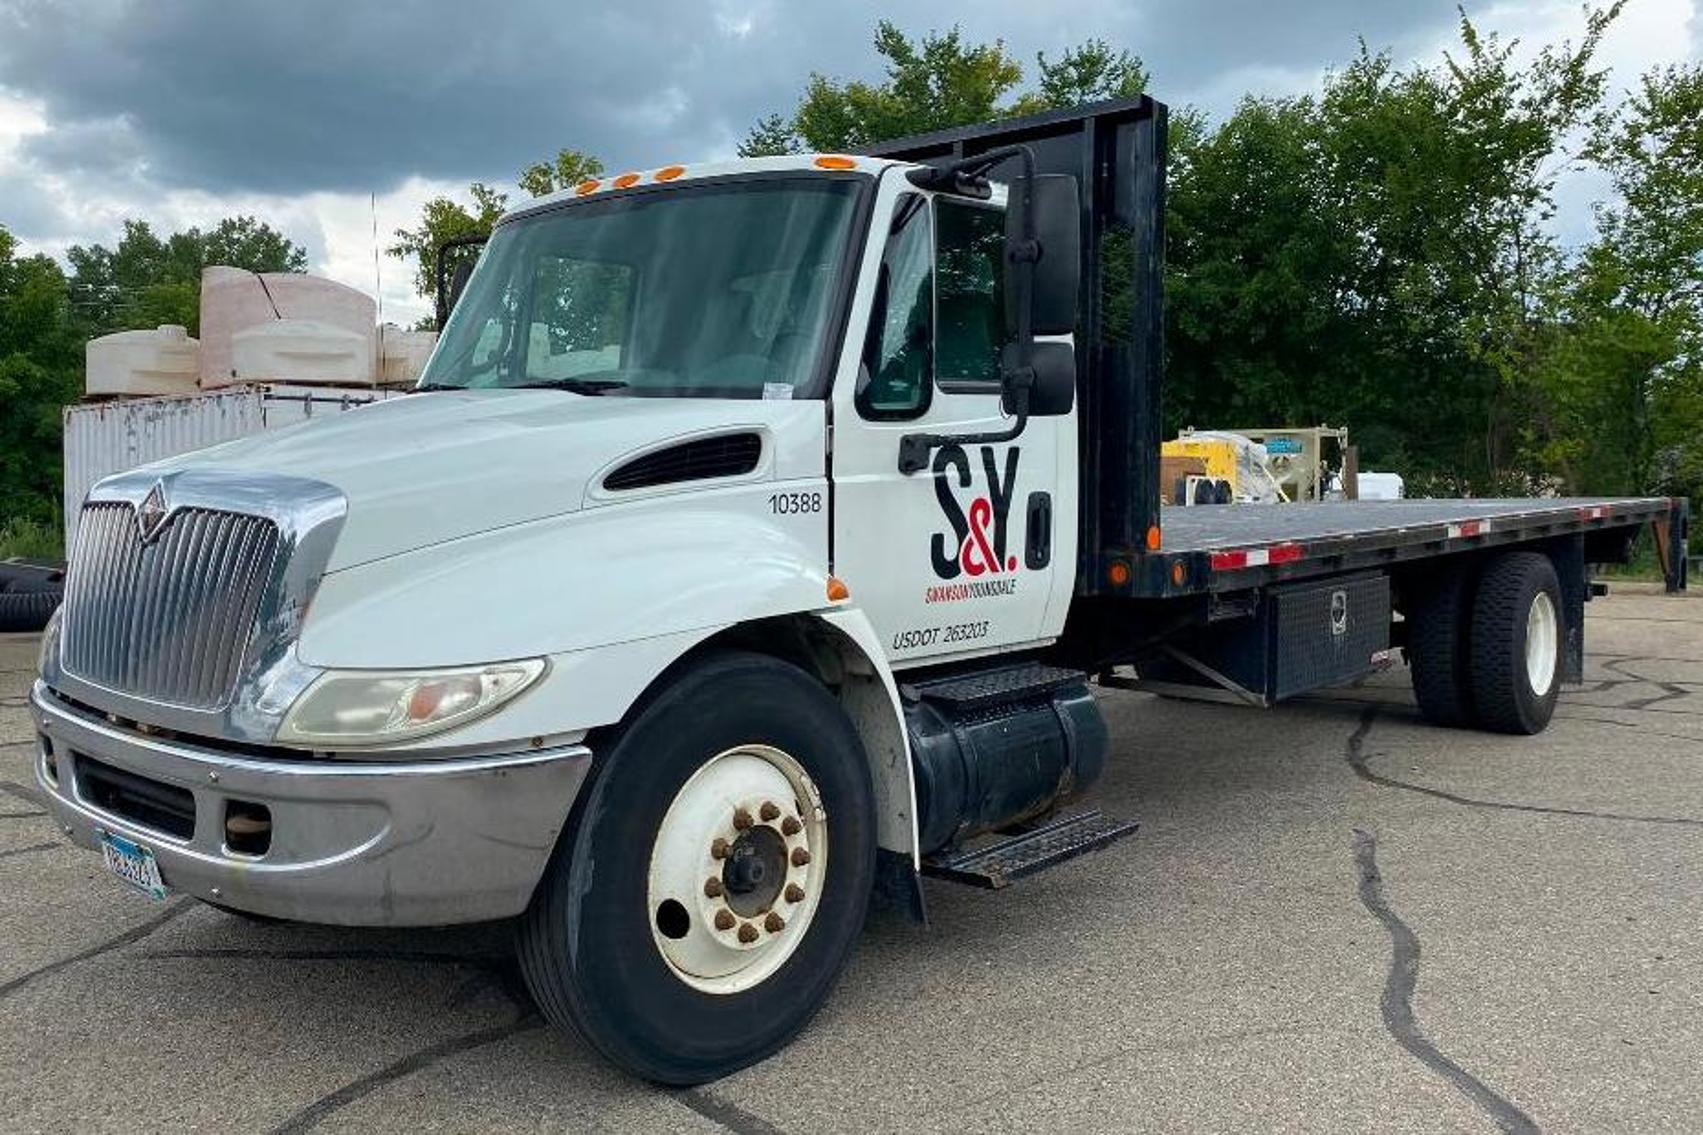 IH 4900 110' Boom Truck, 2000 Freightliner Semi With Cat 3406E 2WS Engine, Talbert 48' Hydraulic Sliding Axle Trailer, 97 Ford Super Duty Dump Truck With 33K Miles, Air Compressor, Tennant Sweeper, IH Flatbed With Liftgate